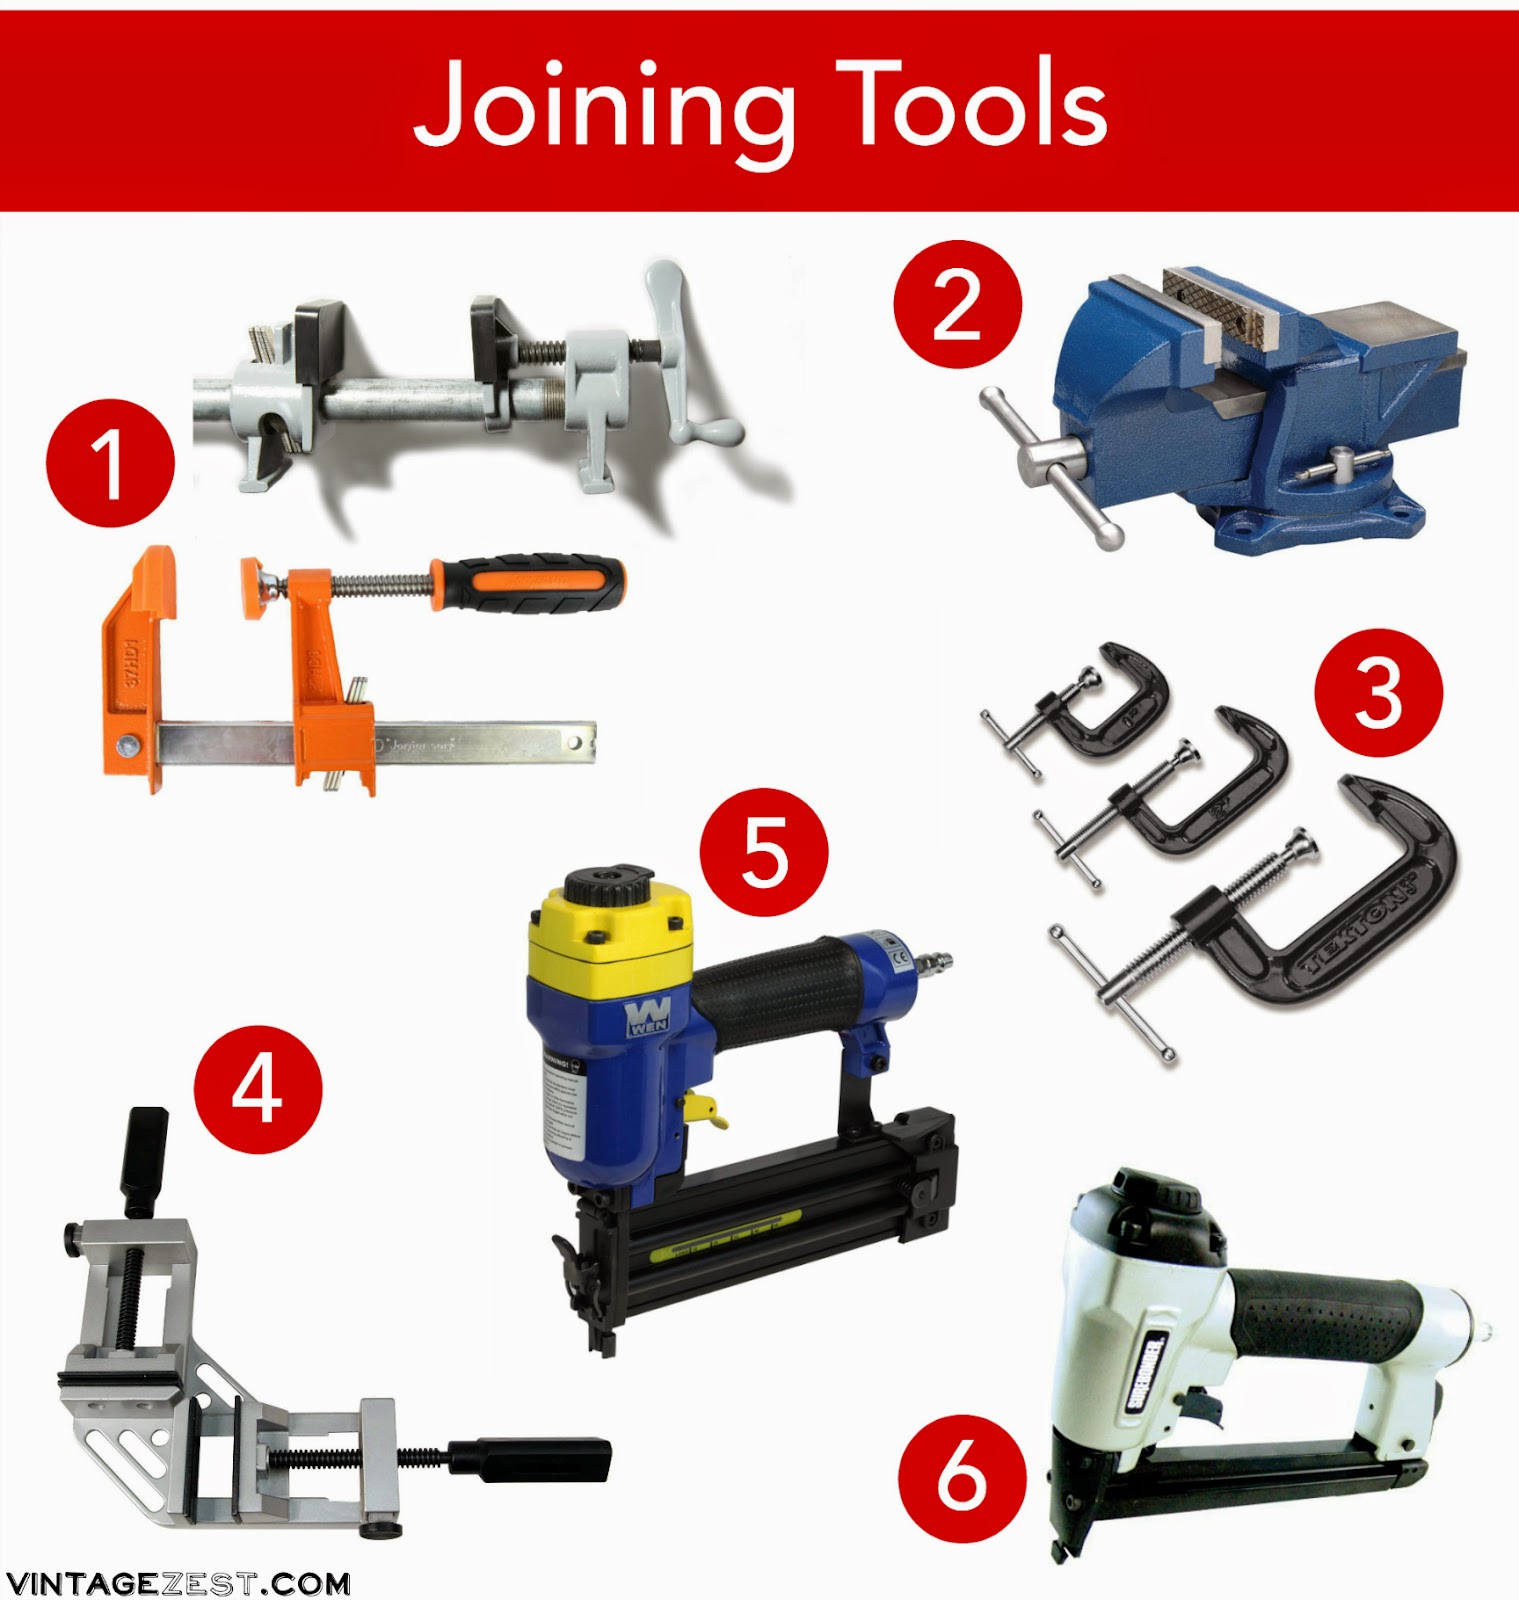 Essential Woodworking Tools for Beginners: A wishlist ...